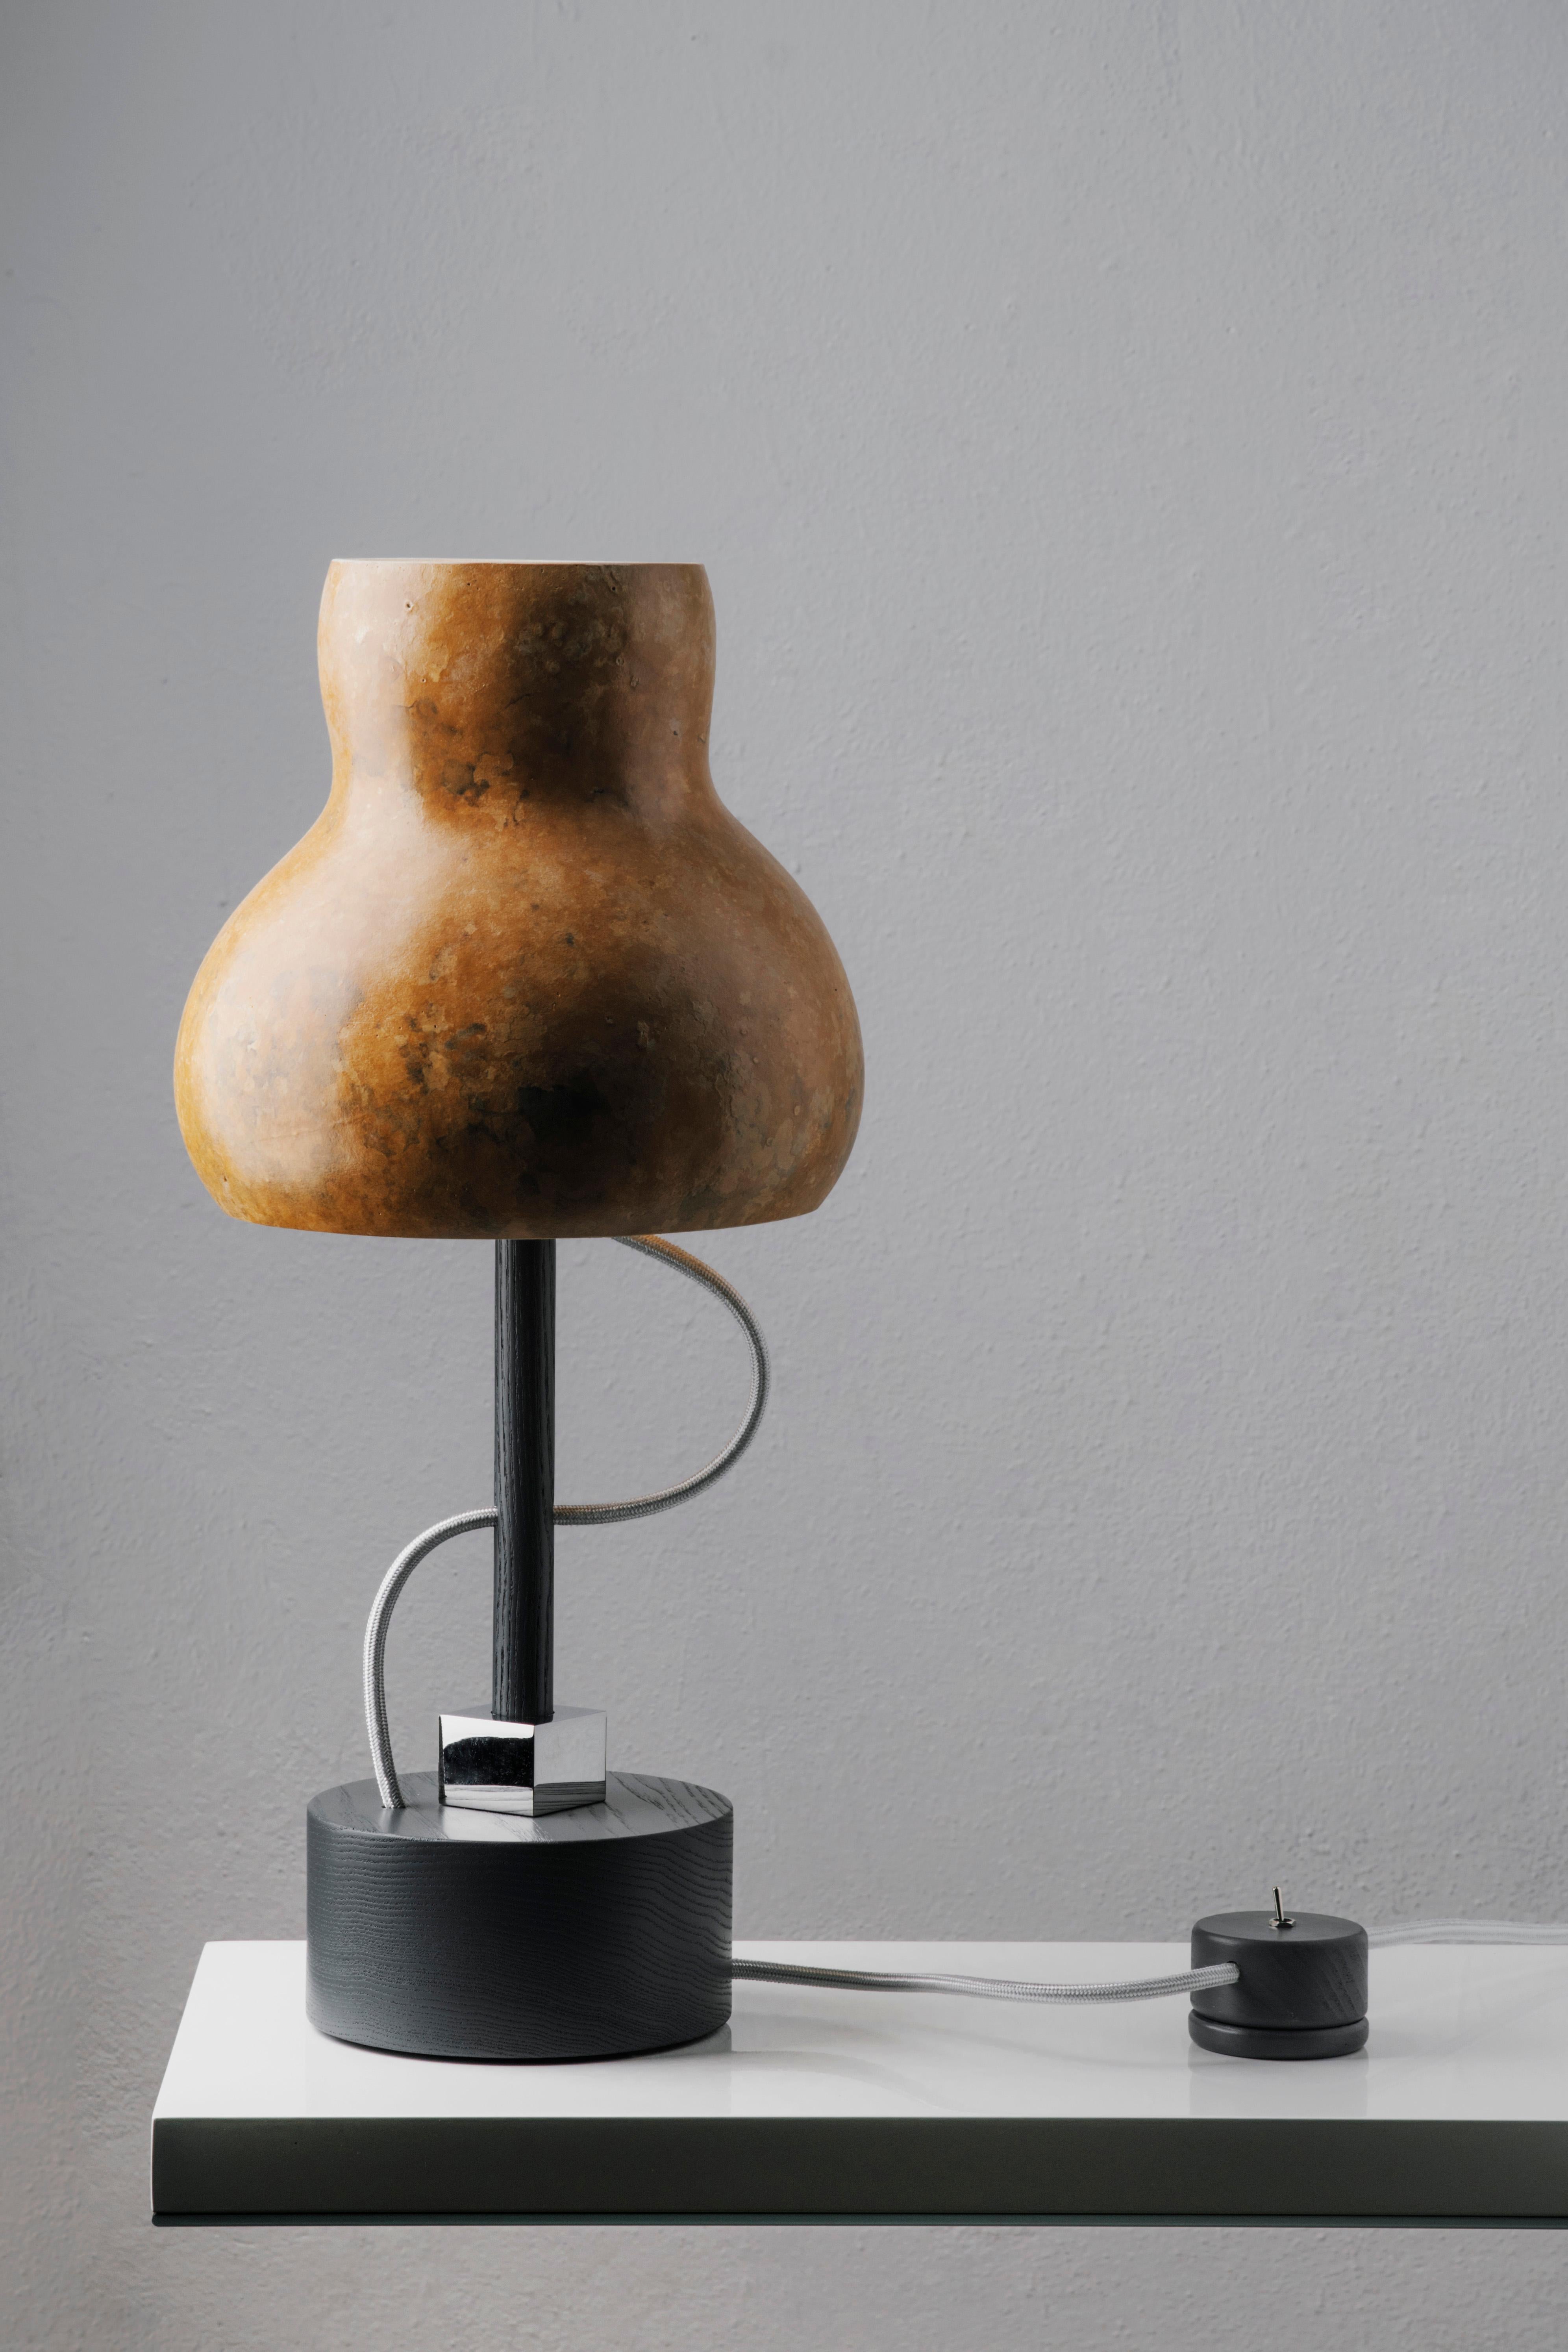 The table lamp takes shapes from the animal and plant world. The lampshade in Lagenaria dried pumpkin, with its unique veining, together with the rounded ash wood base, brings to mind a typical inhabitant of the undergrowth.
The coloured fabric